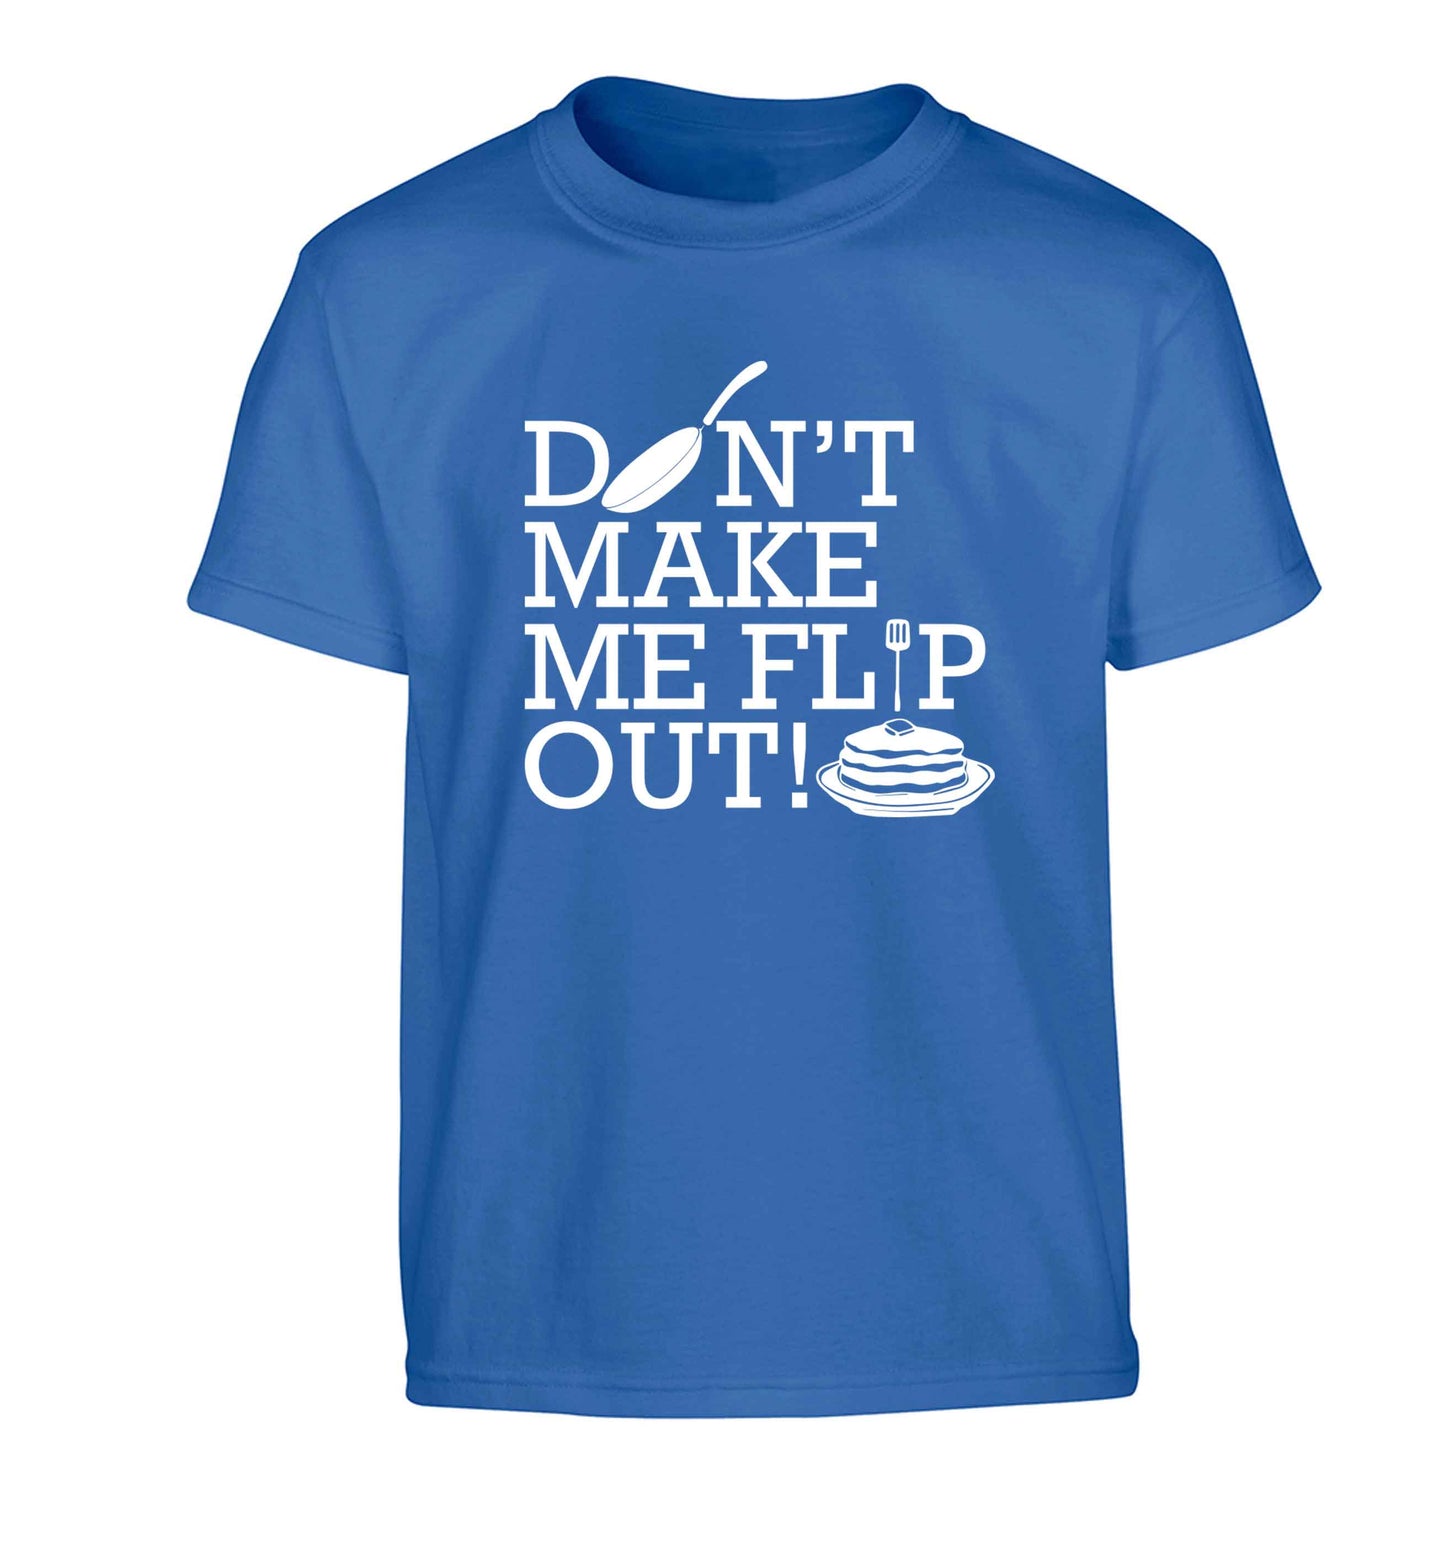 Don't make me flip out Children's blue Tshirt 12-13 Years